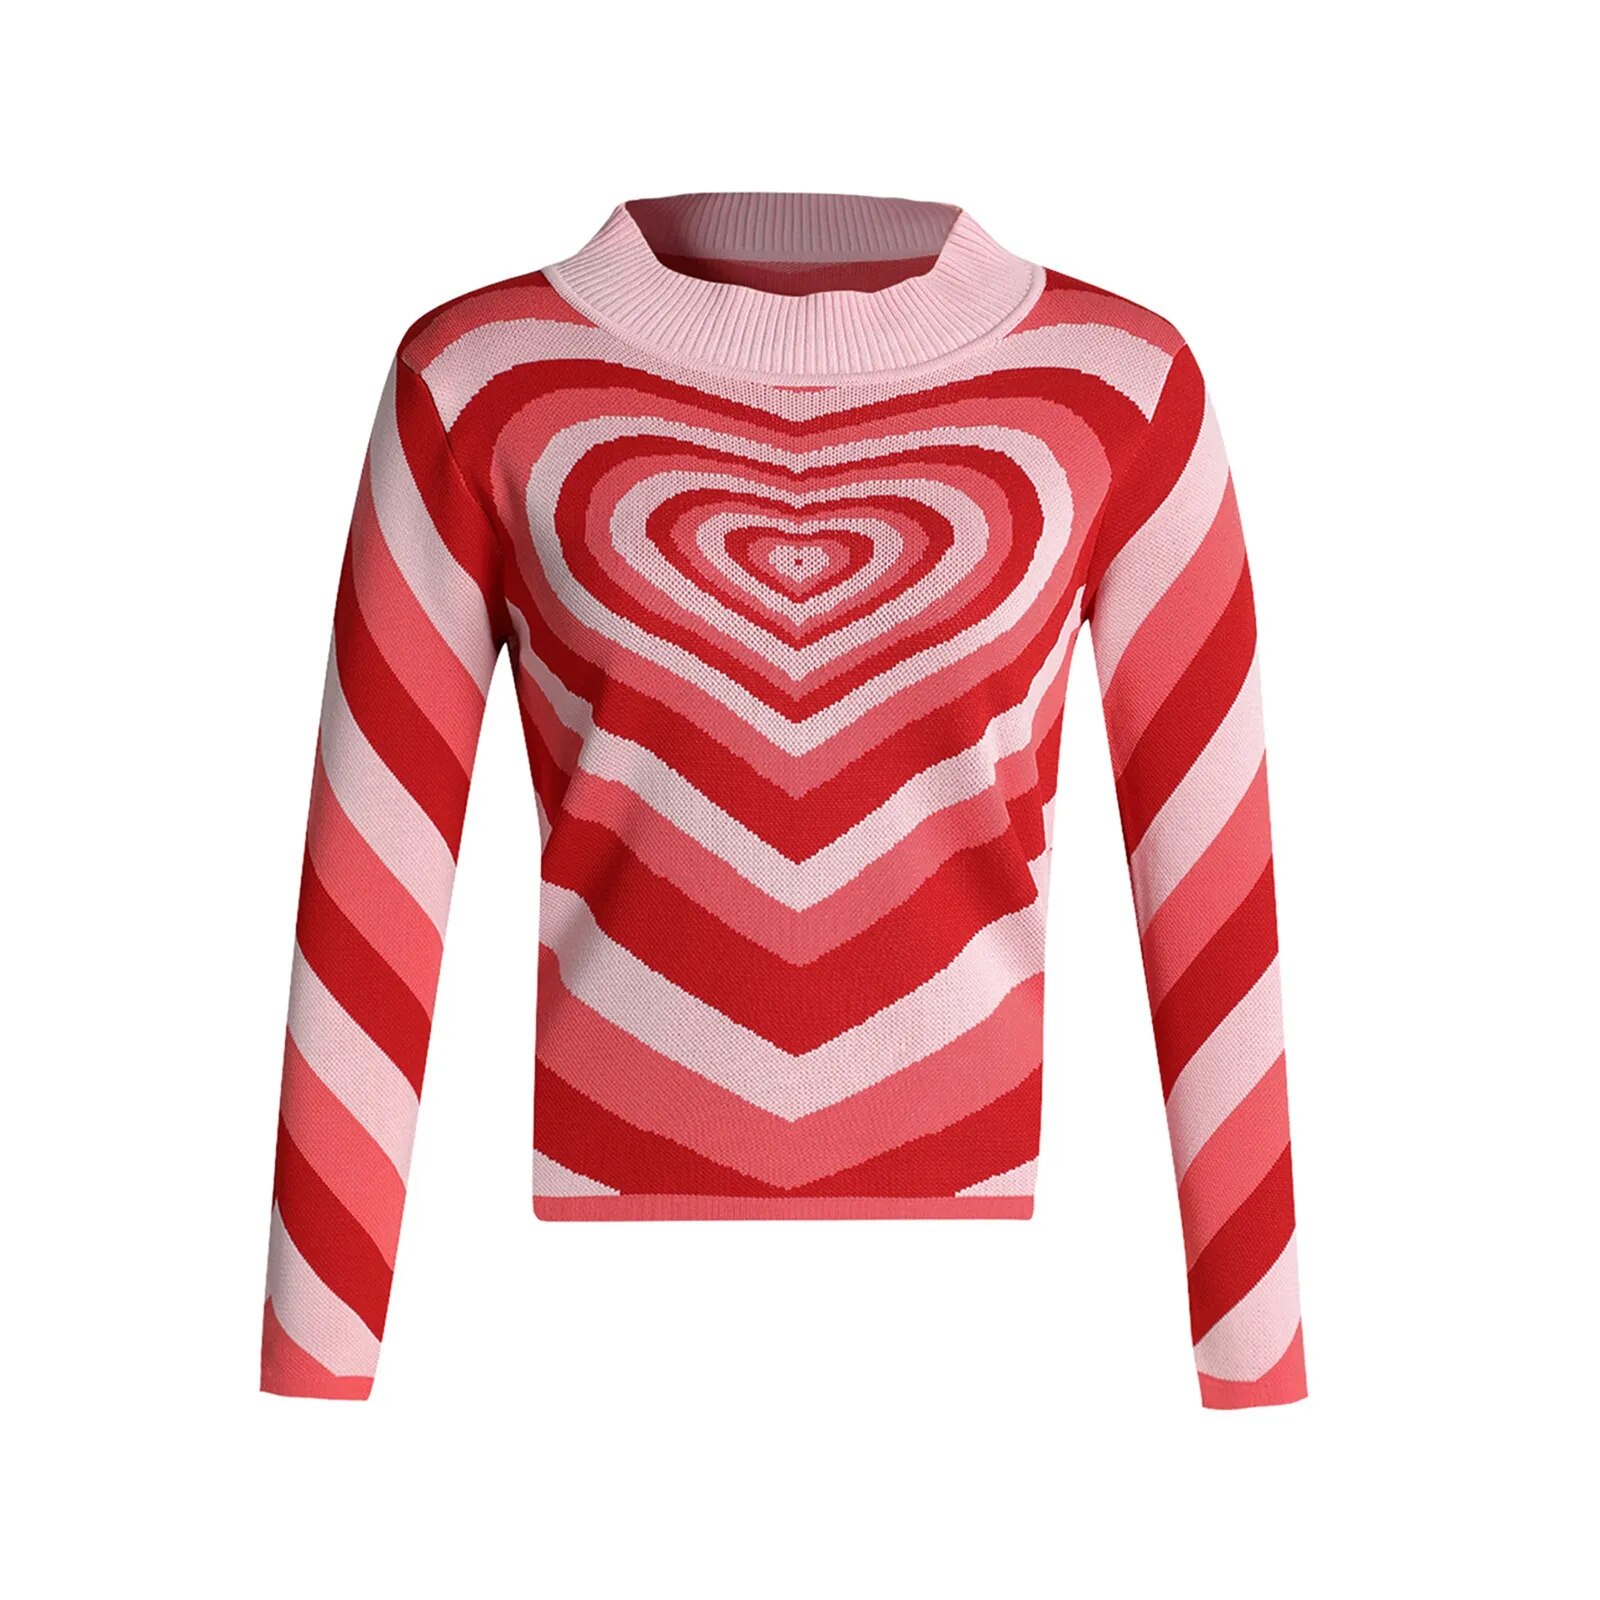 Colorful Heart Print Knit Turtleneck Sweater